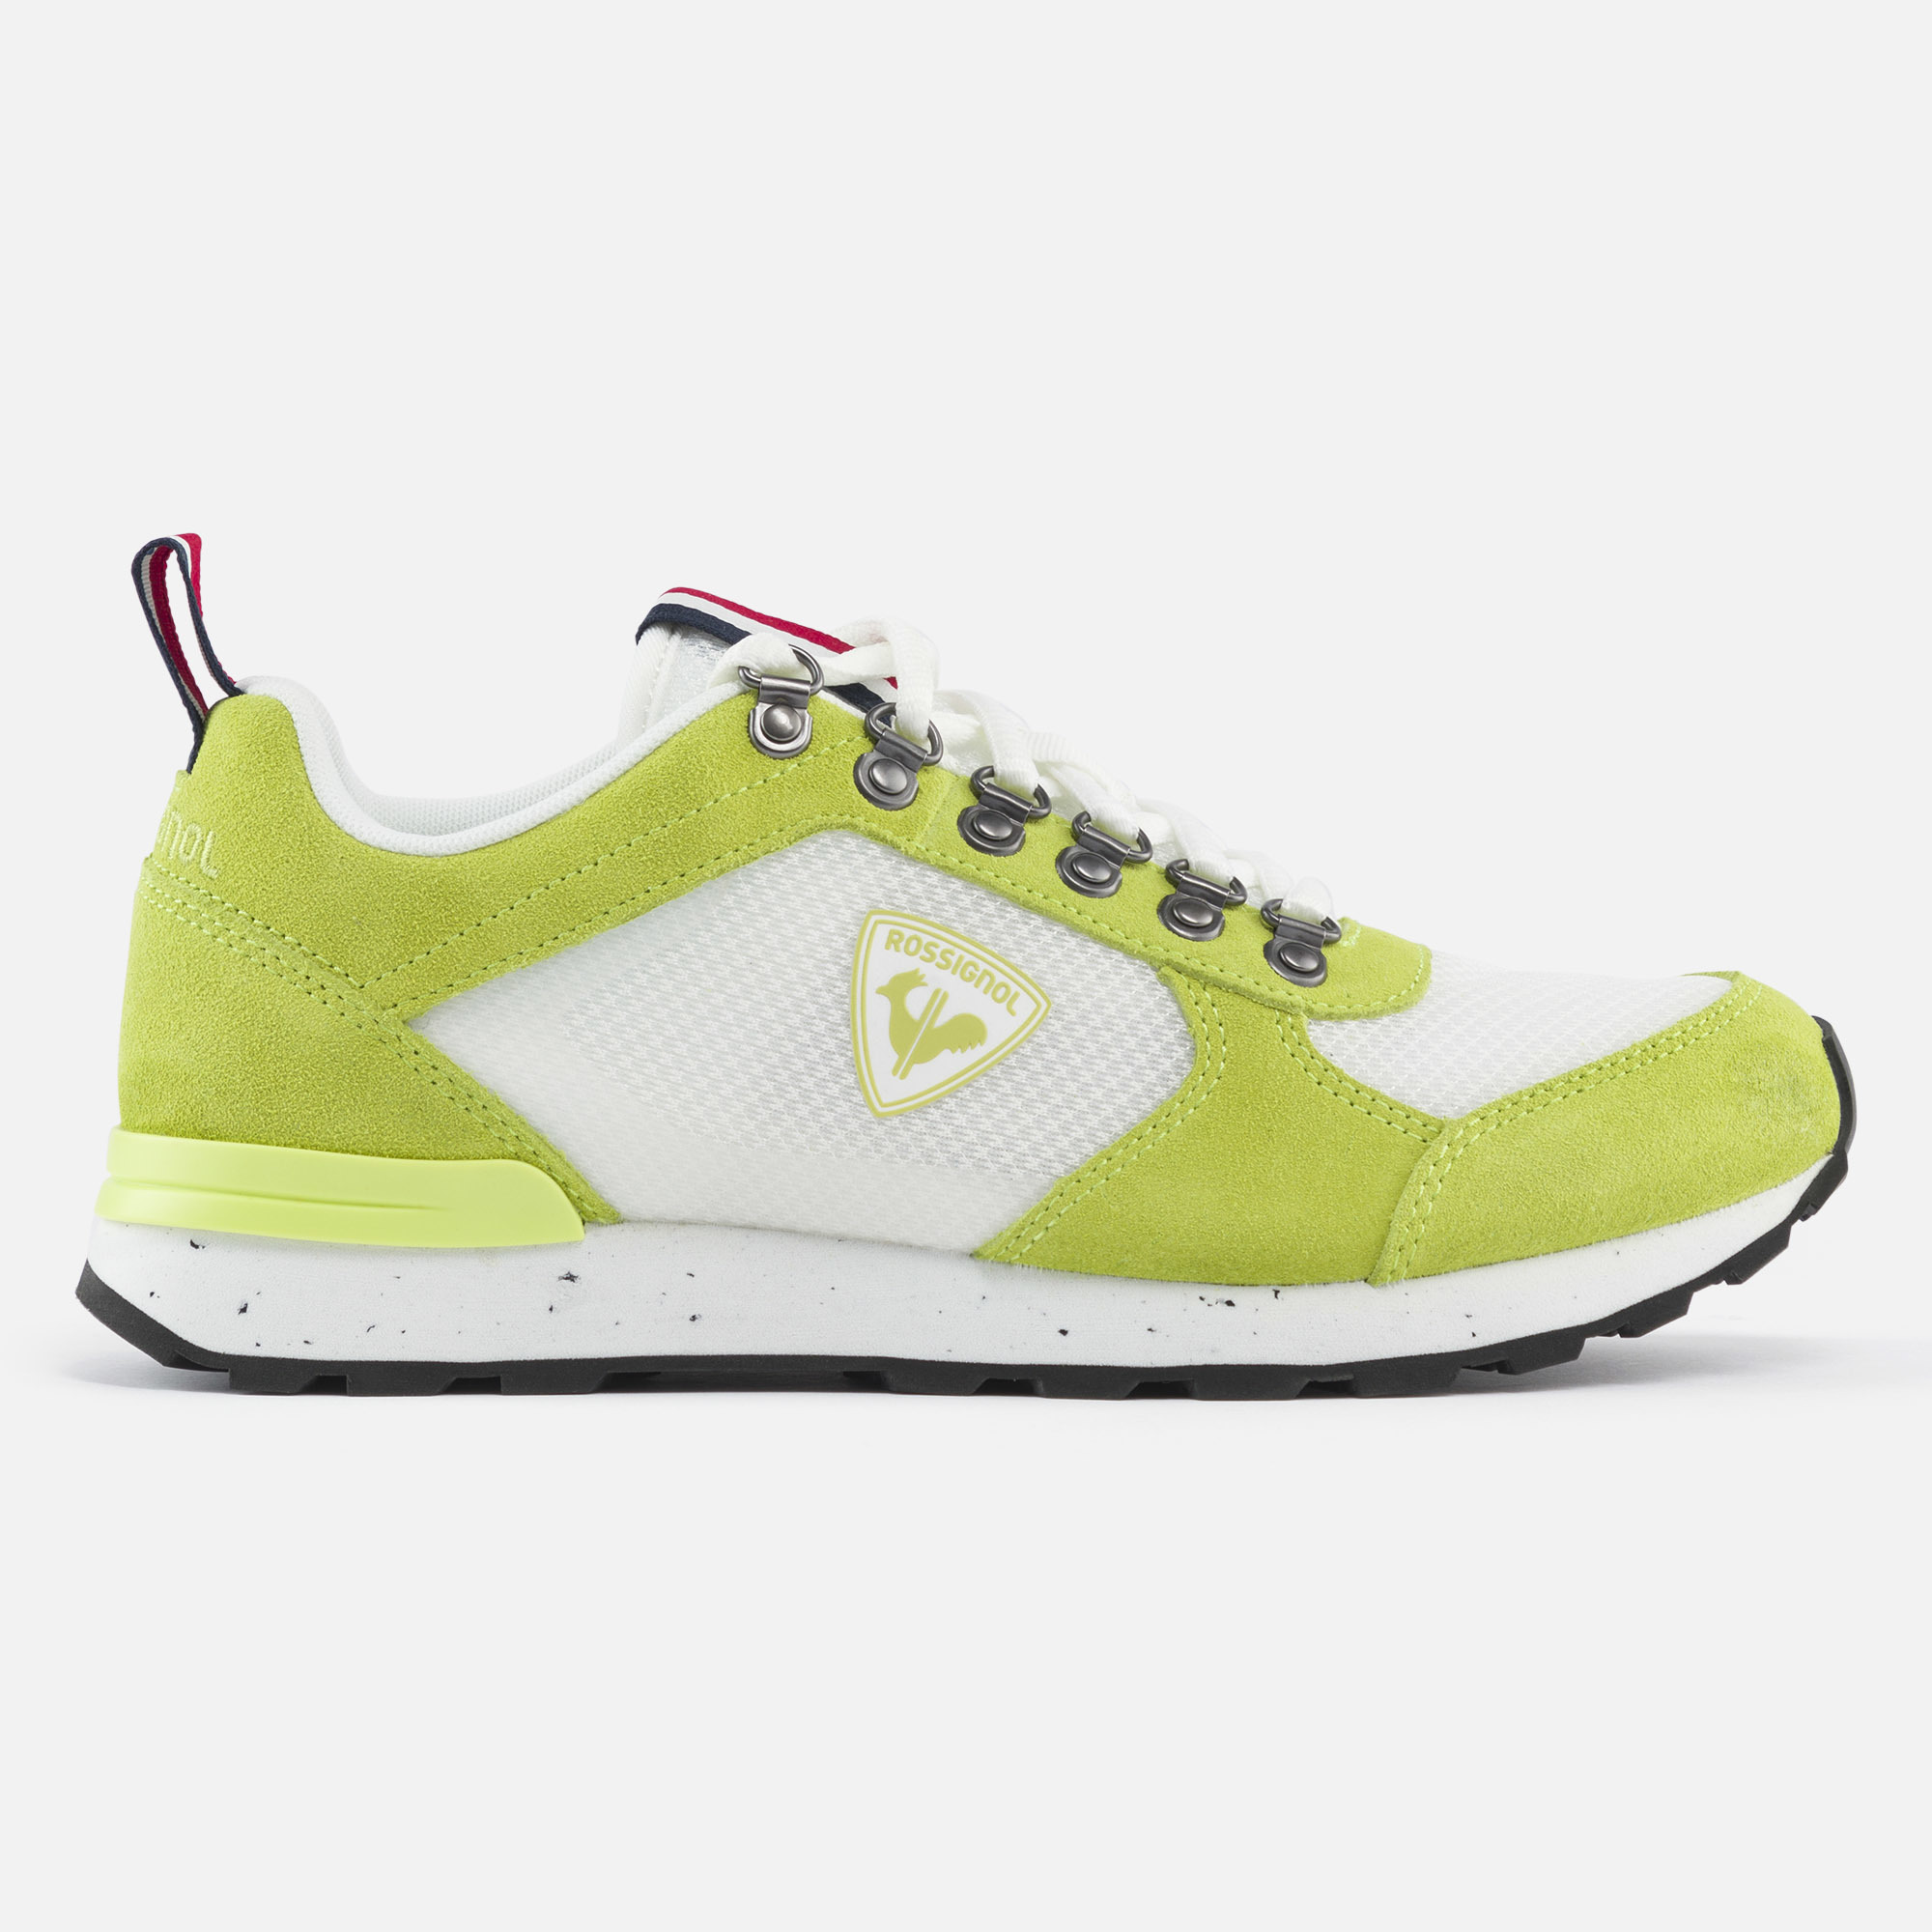 Women's Heritage Special white citron sneakers